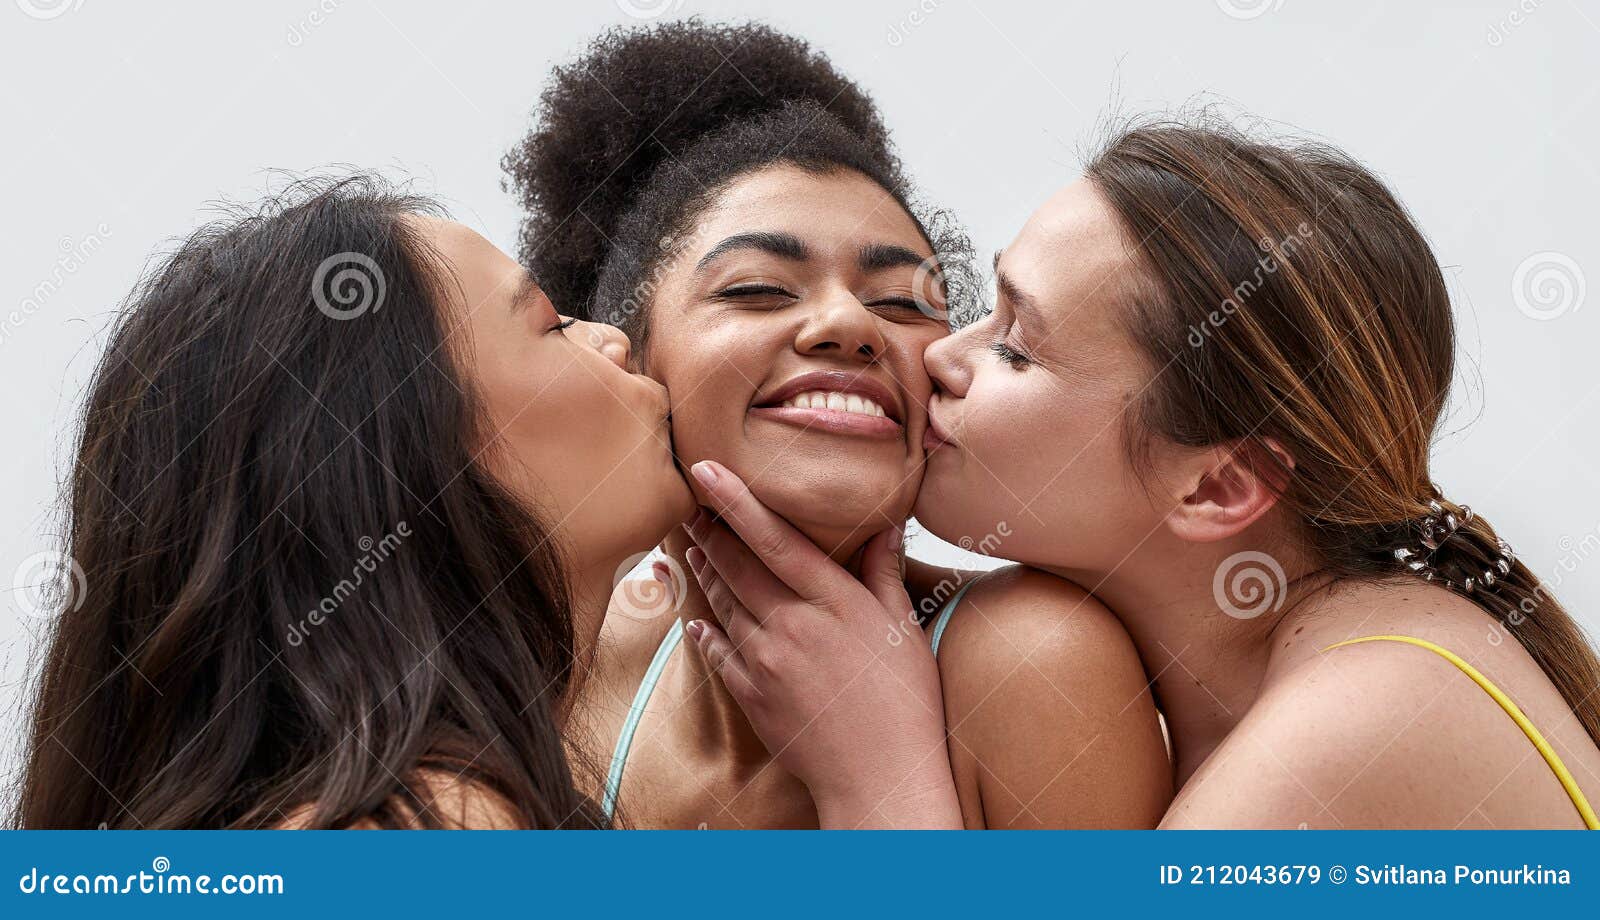 Close Up of Happy Young Women in Colorful Underwear Kissing Their ...